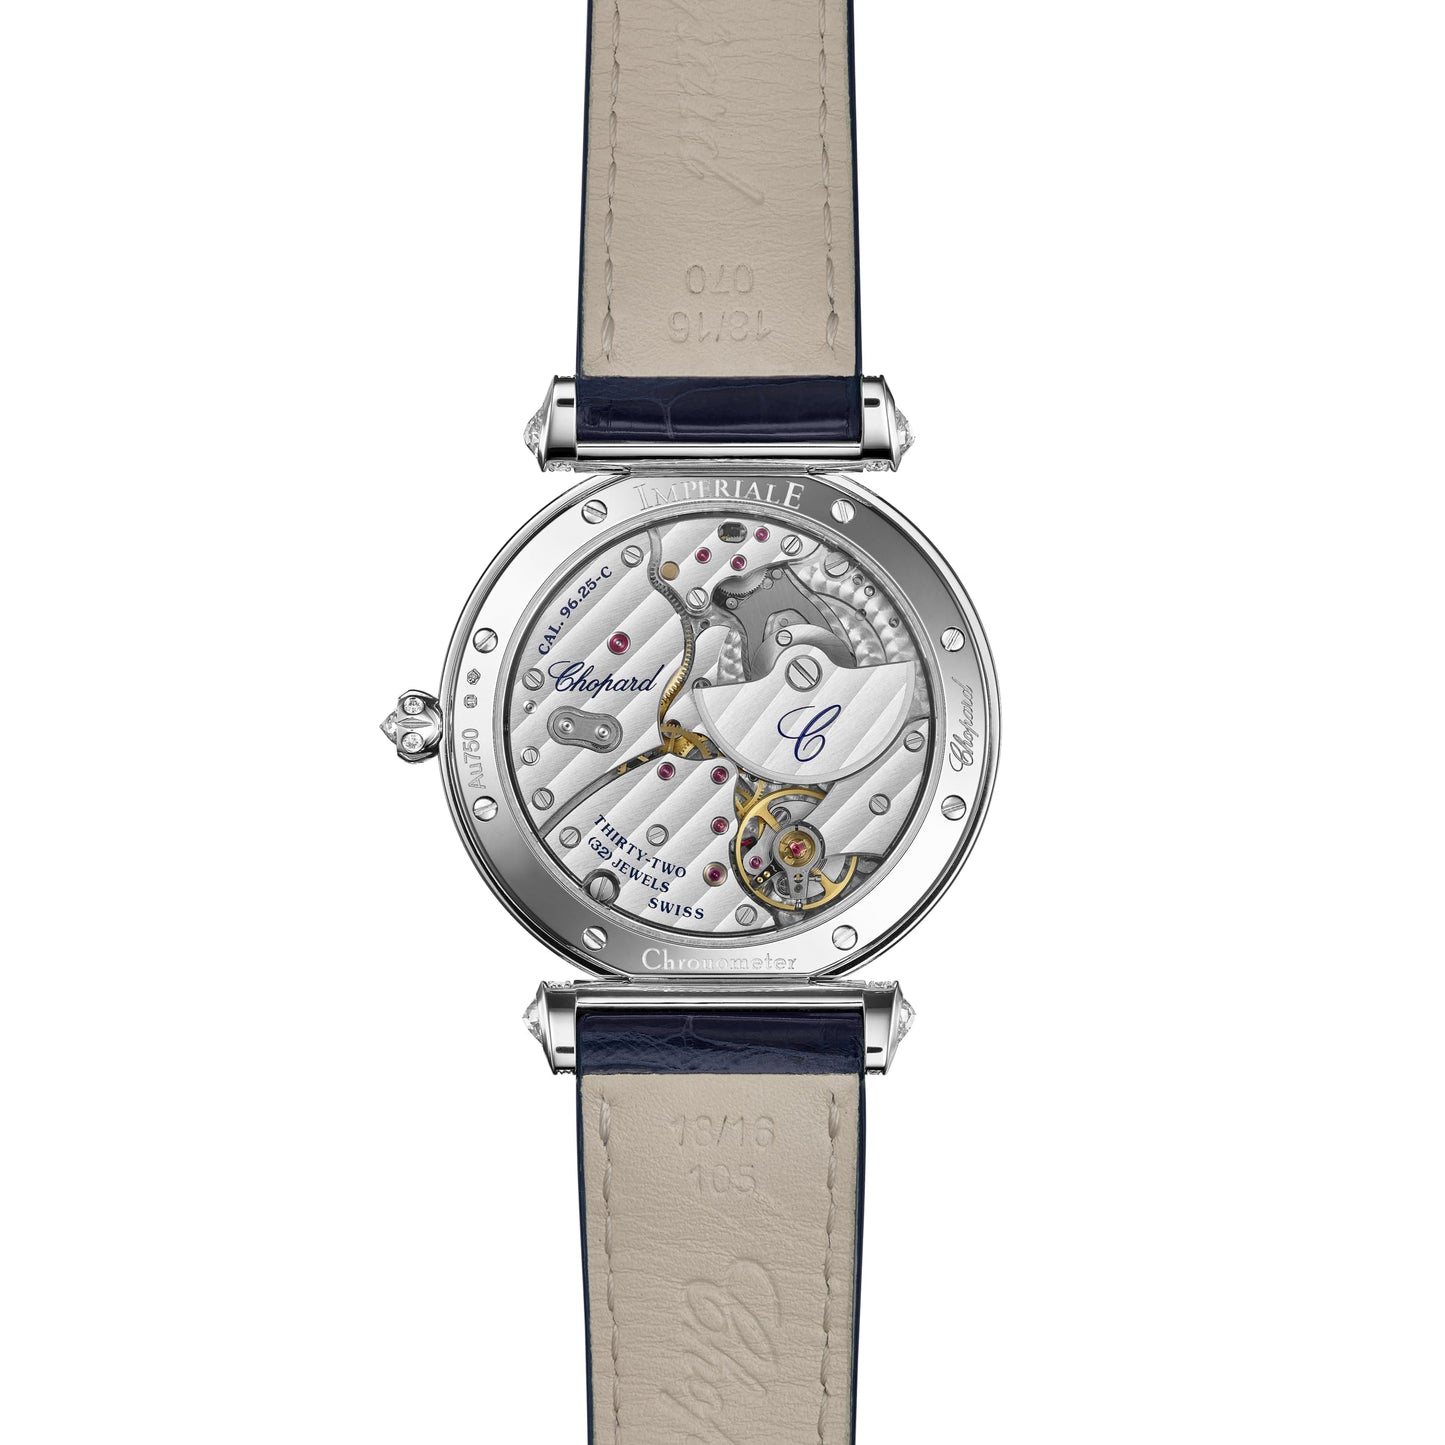 IMPERIALE MOONPHASE 36 MM, AUTOMATIC, ETHICAL WHITE GOLD, DIAMONDS 384246-1002